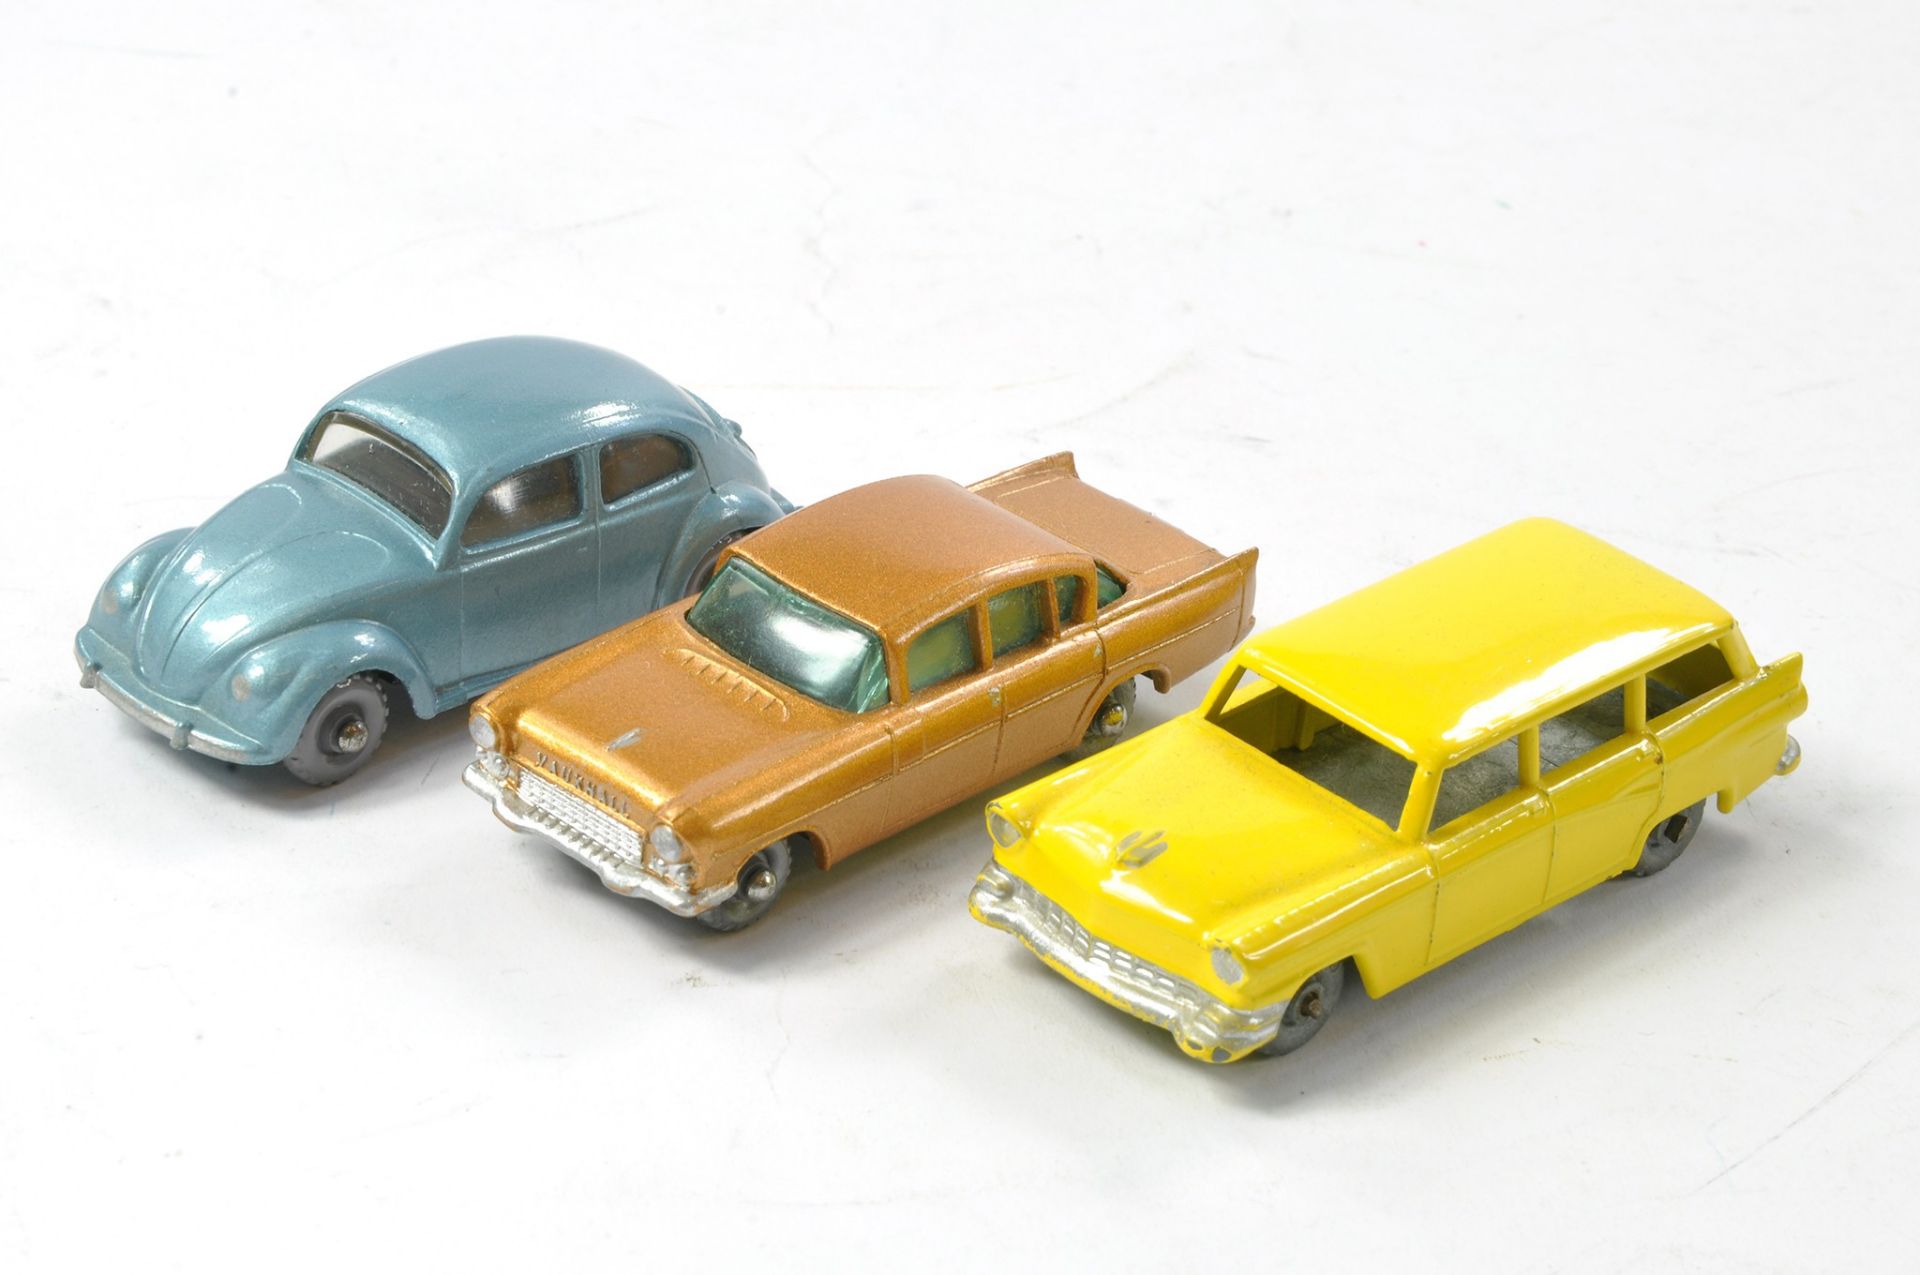 Matchbox Regular Wheels Trio comprising Ford Station Wagon, VW Beetle and Vauxhall Cresta. All